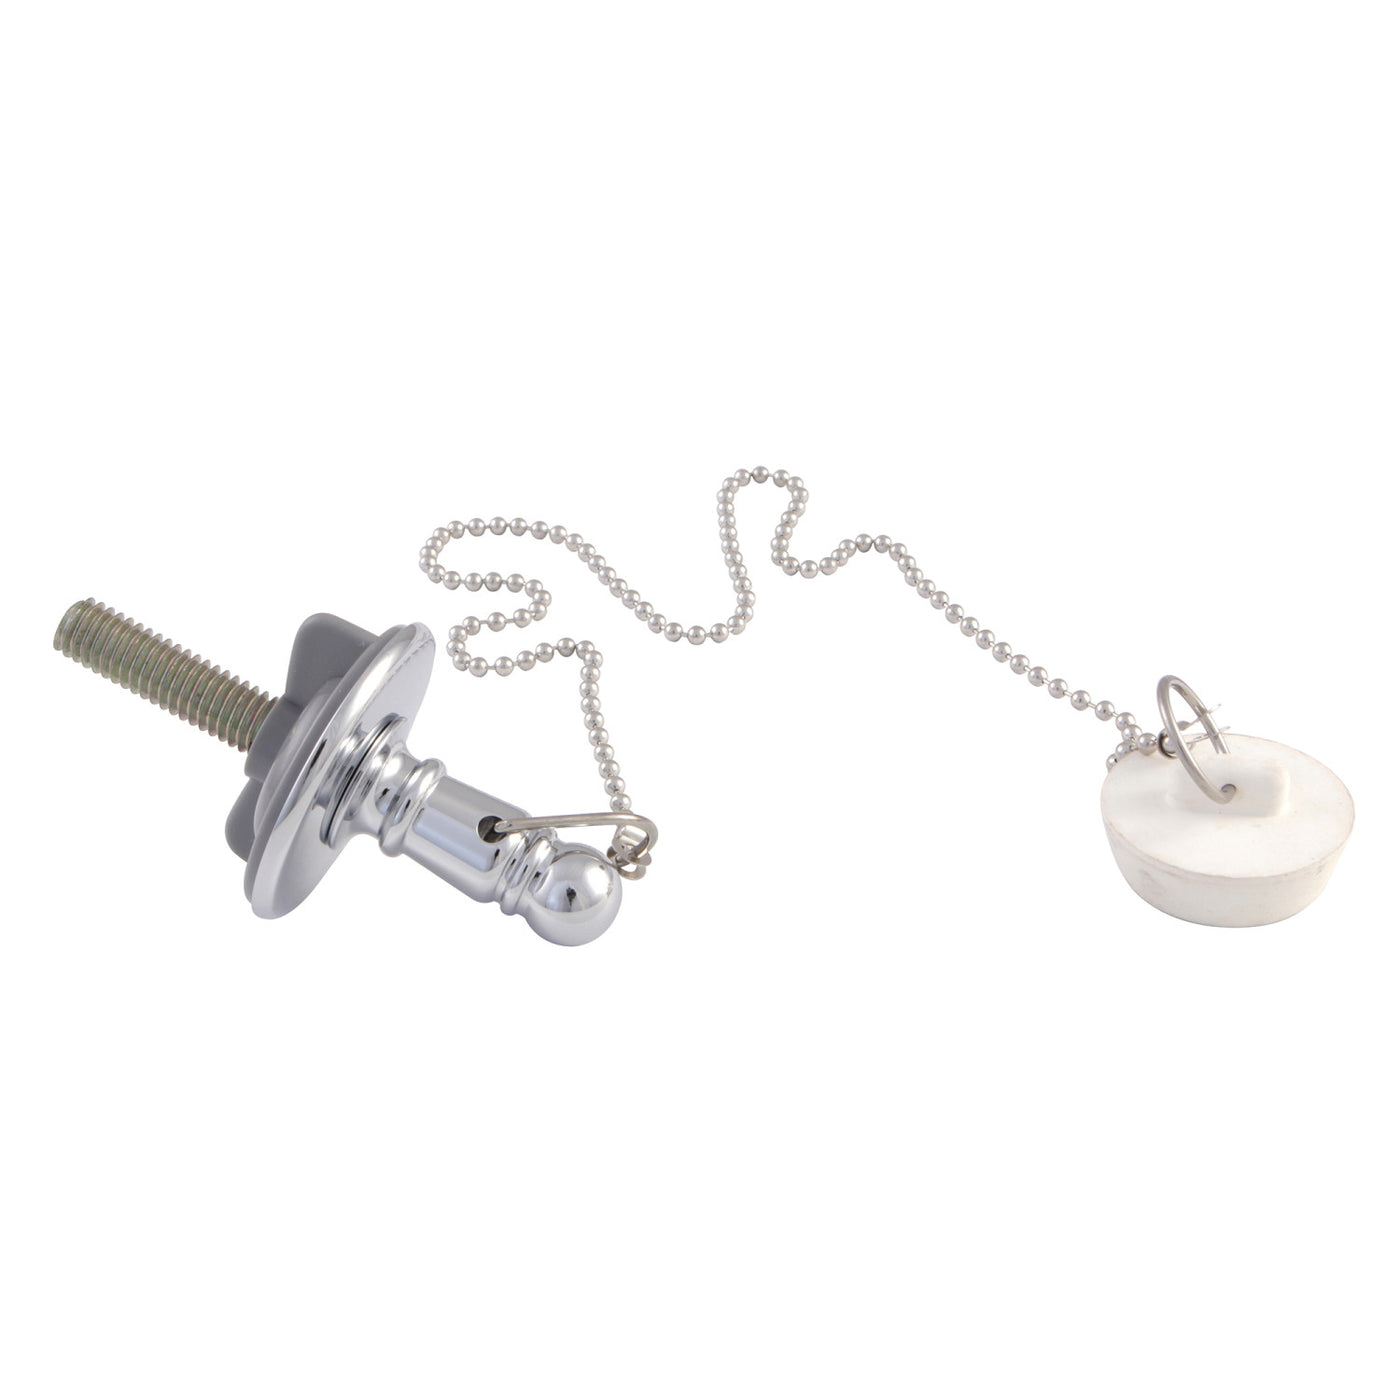 Elements of Design ED1111 Rubber Stopper Chain and Attachment for CC1001, Polished Chrome